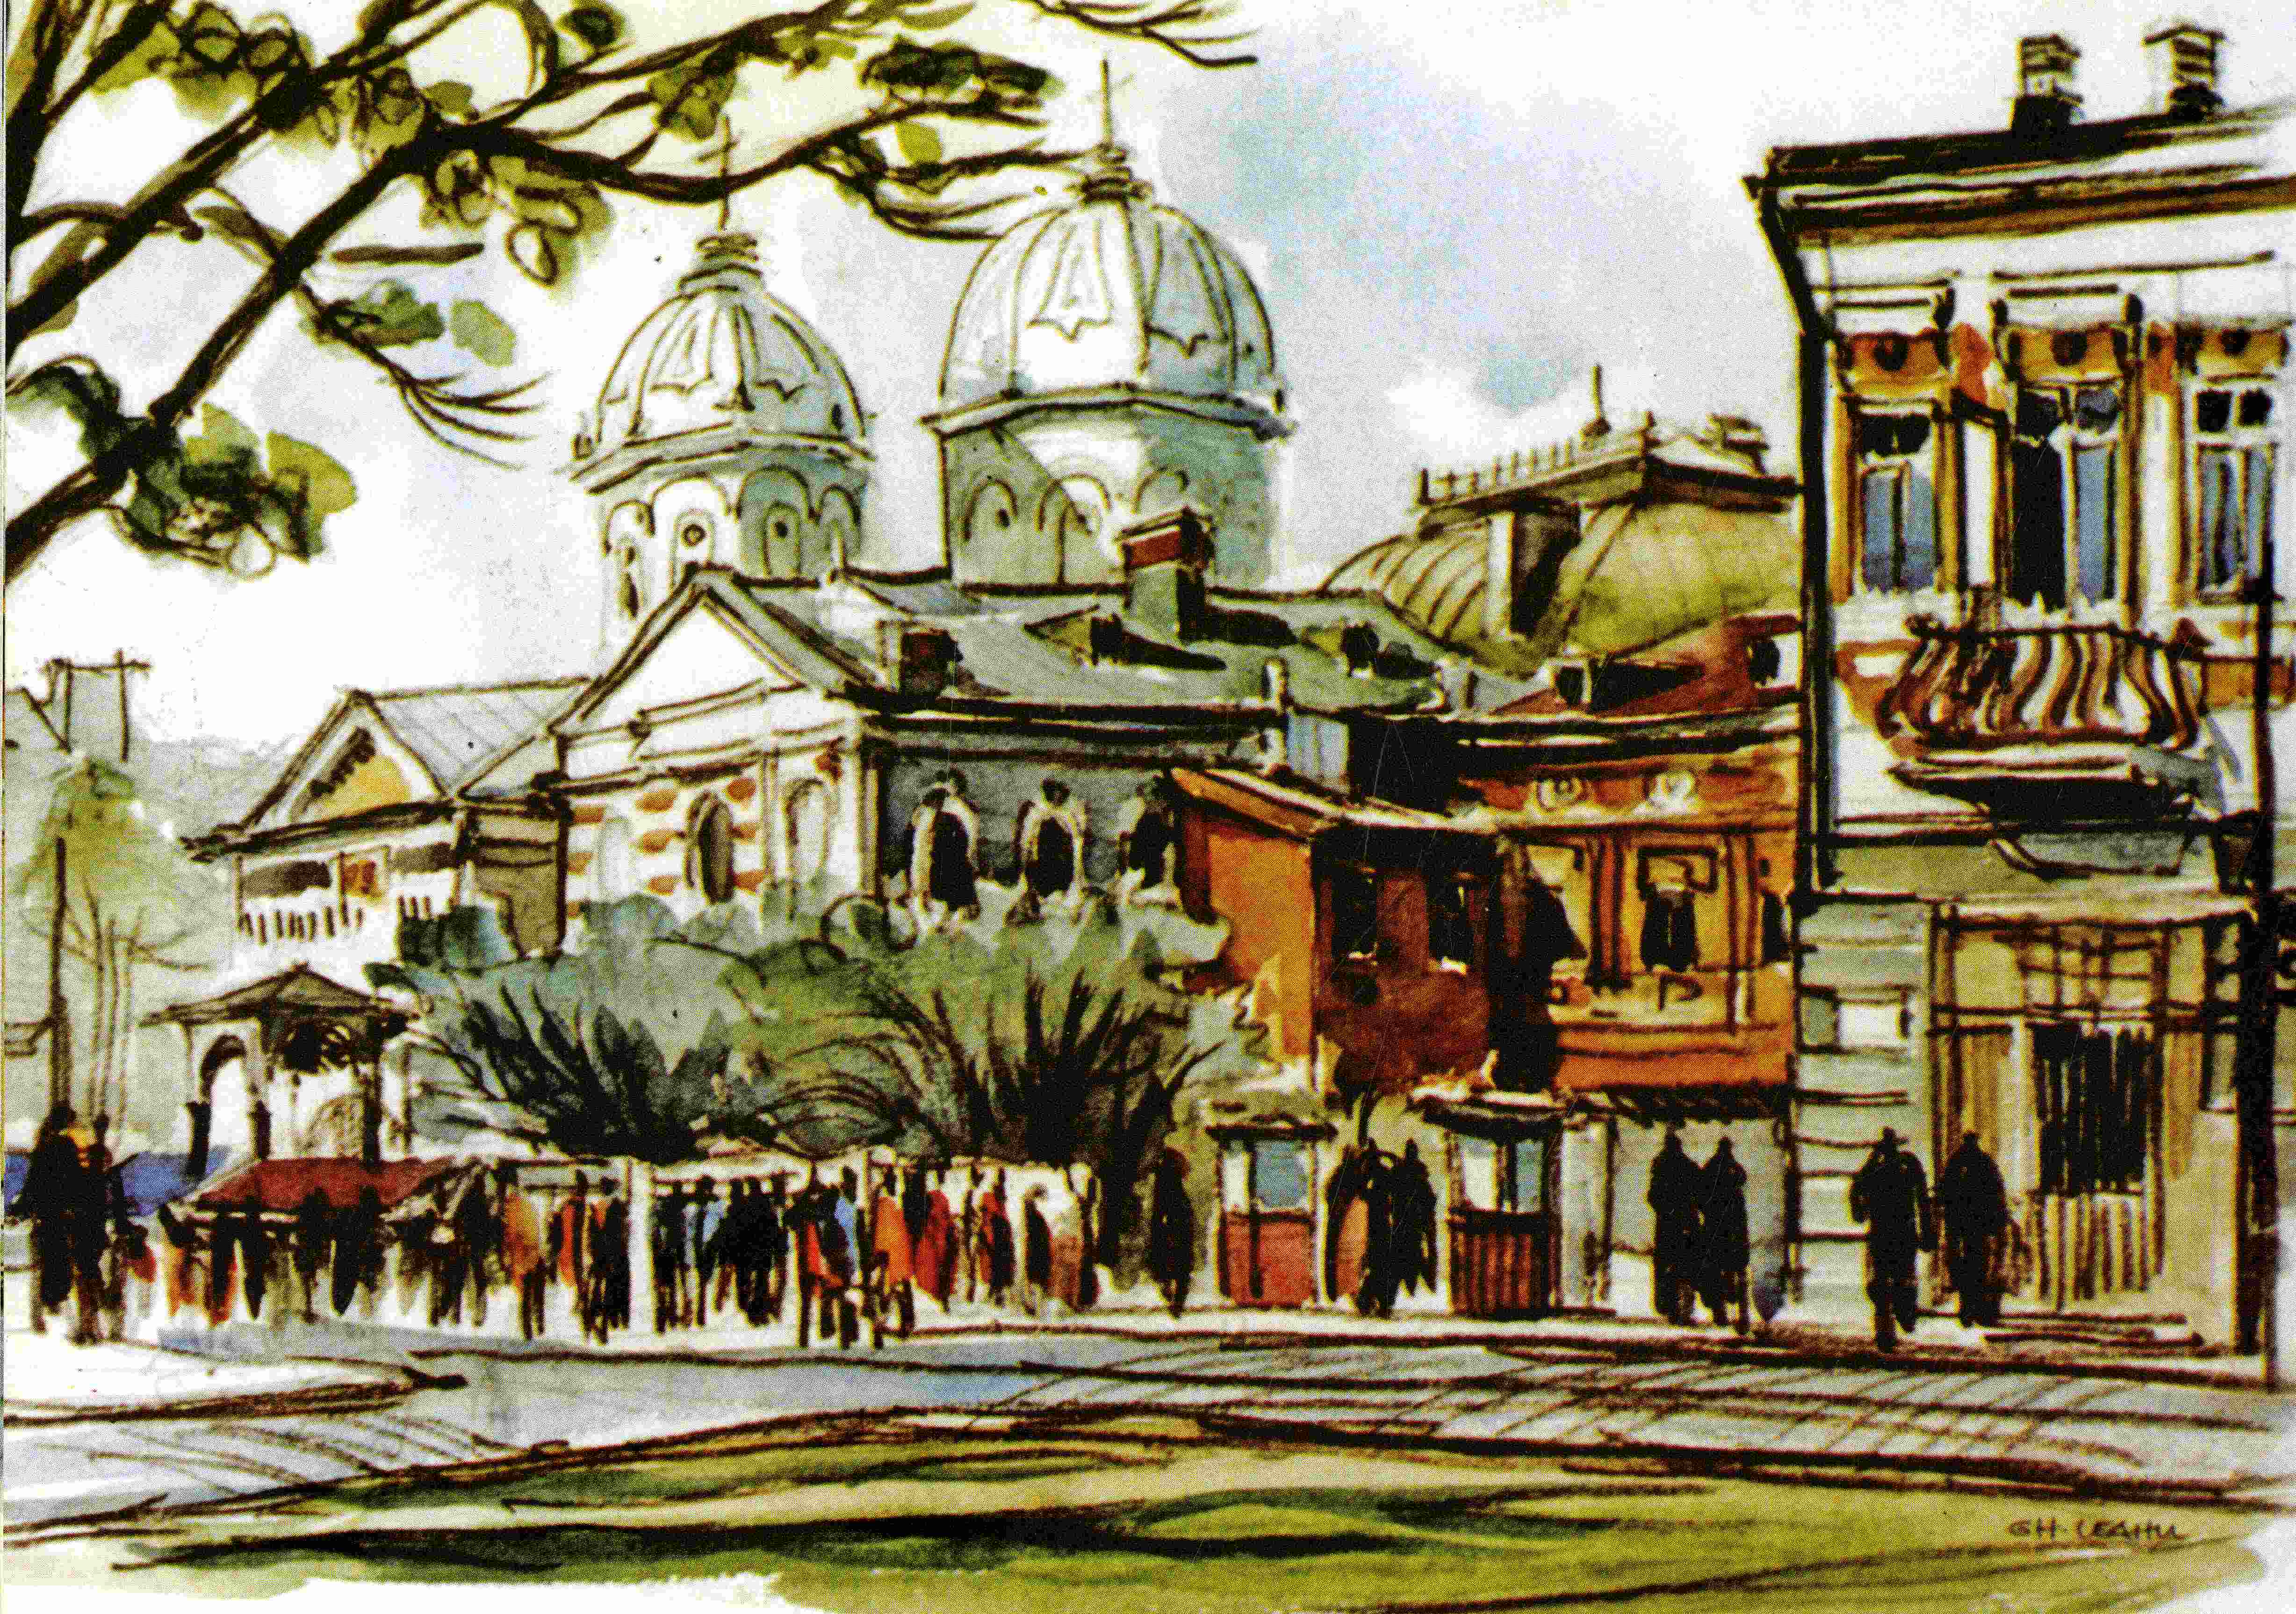 Reproduction after an watercolour painted by Gheorghe Leahu which represents Sfânta Vineri (Saint Friday) Church demolished in 1986